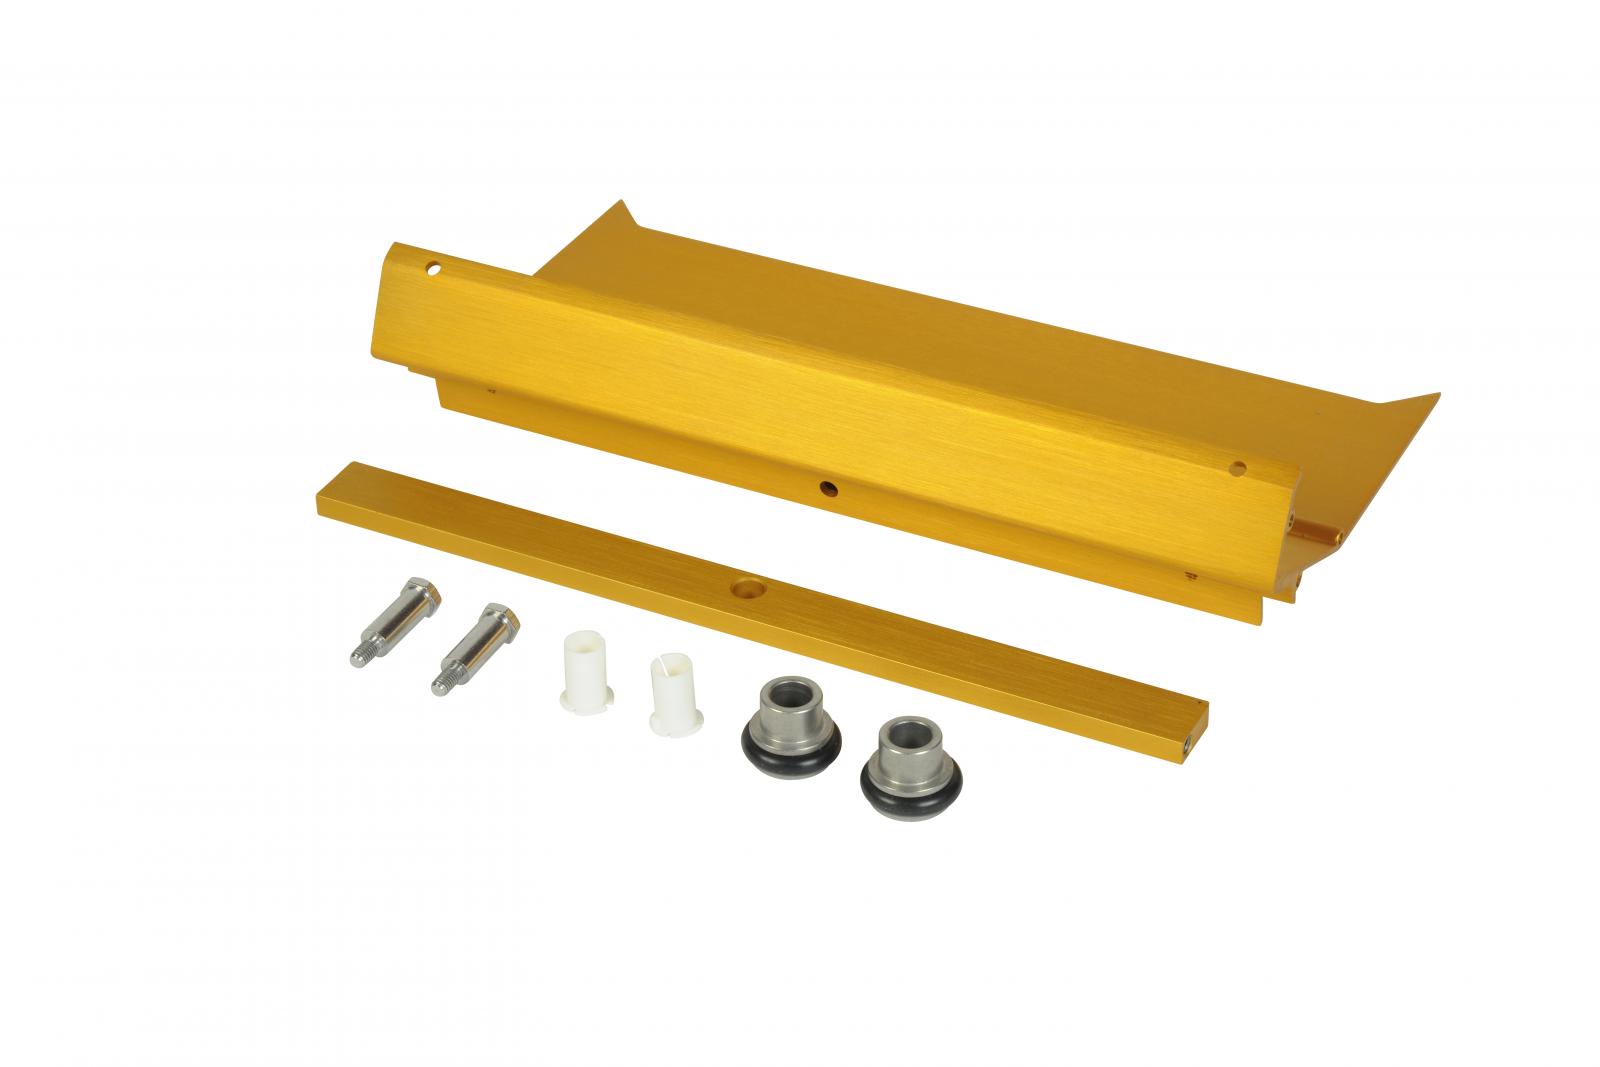 TapeTech® EasyRoll® Conversion Kit A - 10". Part number EZROLL10-A